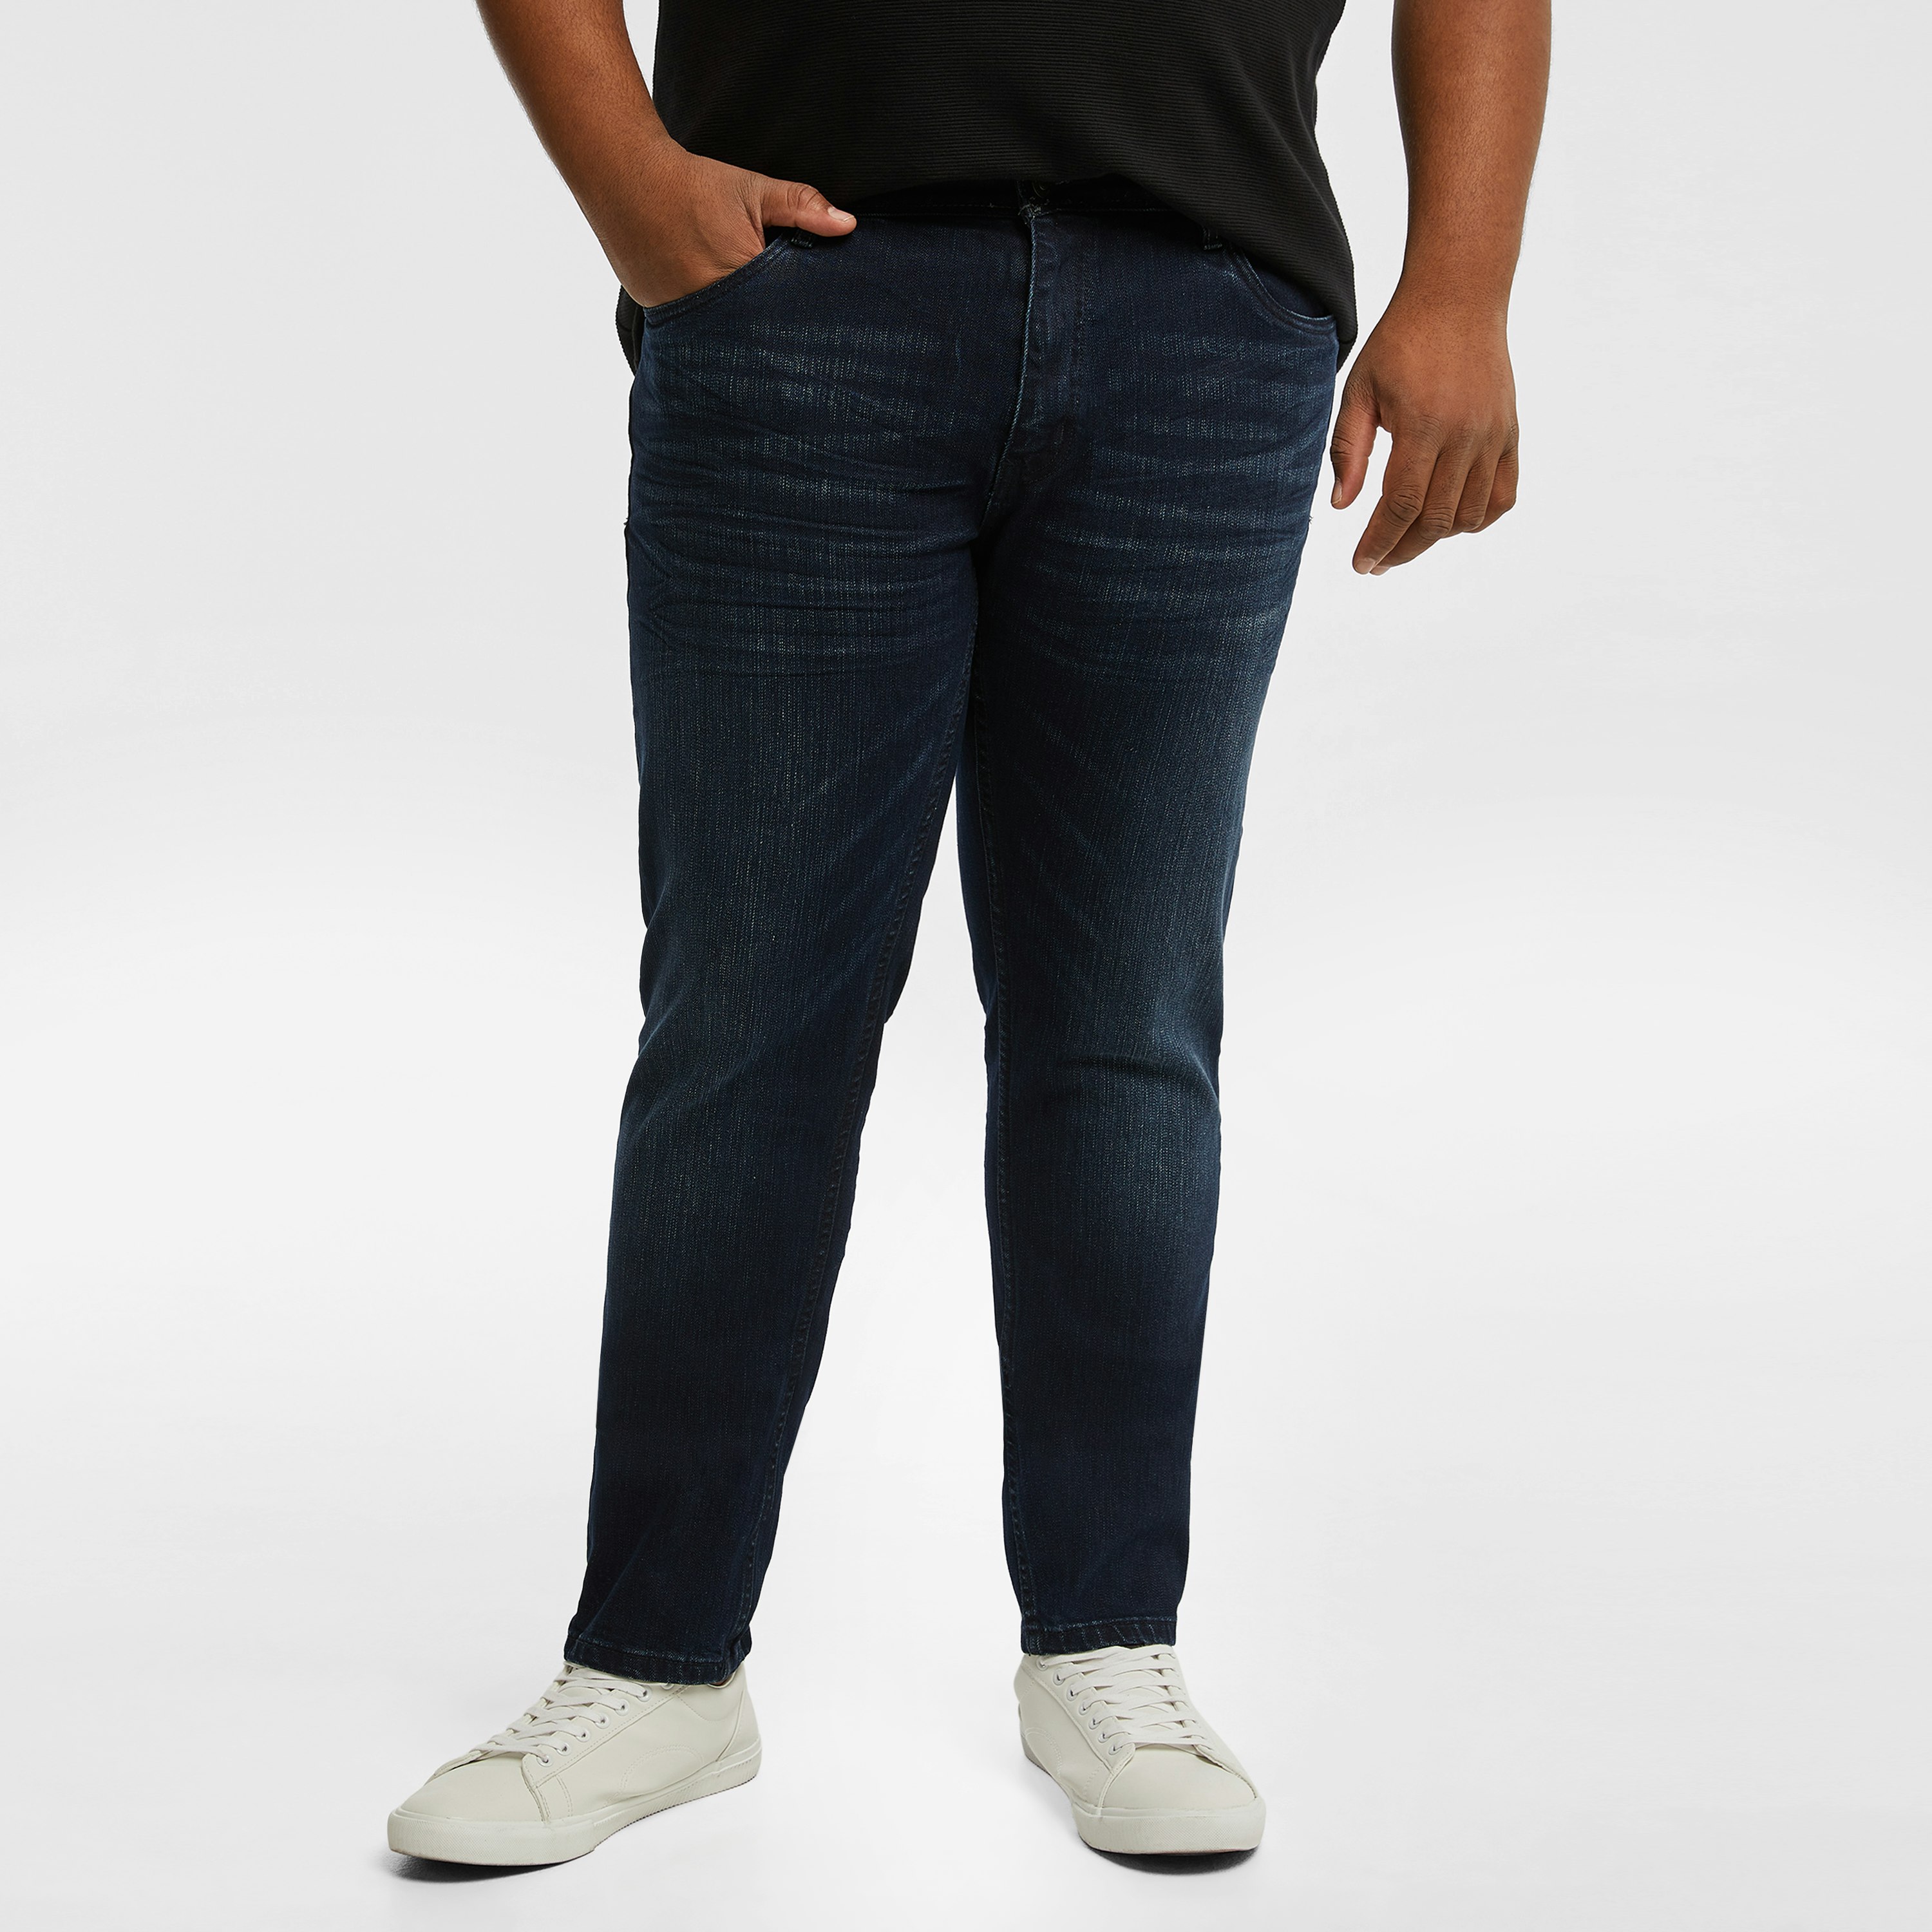 Dark Blue Belmore Tapered Fit Jeans | AXL+CO by Connor